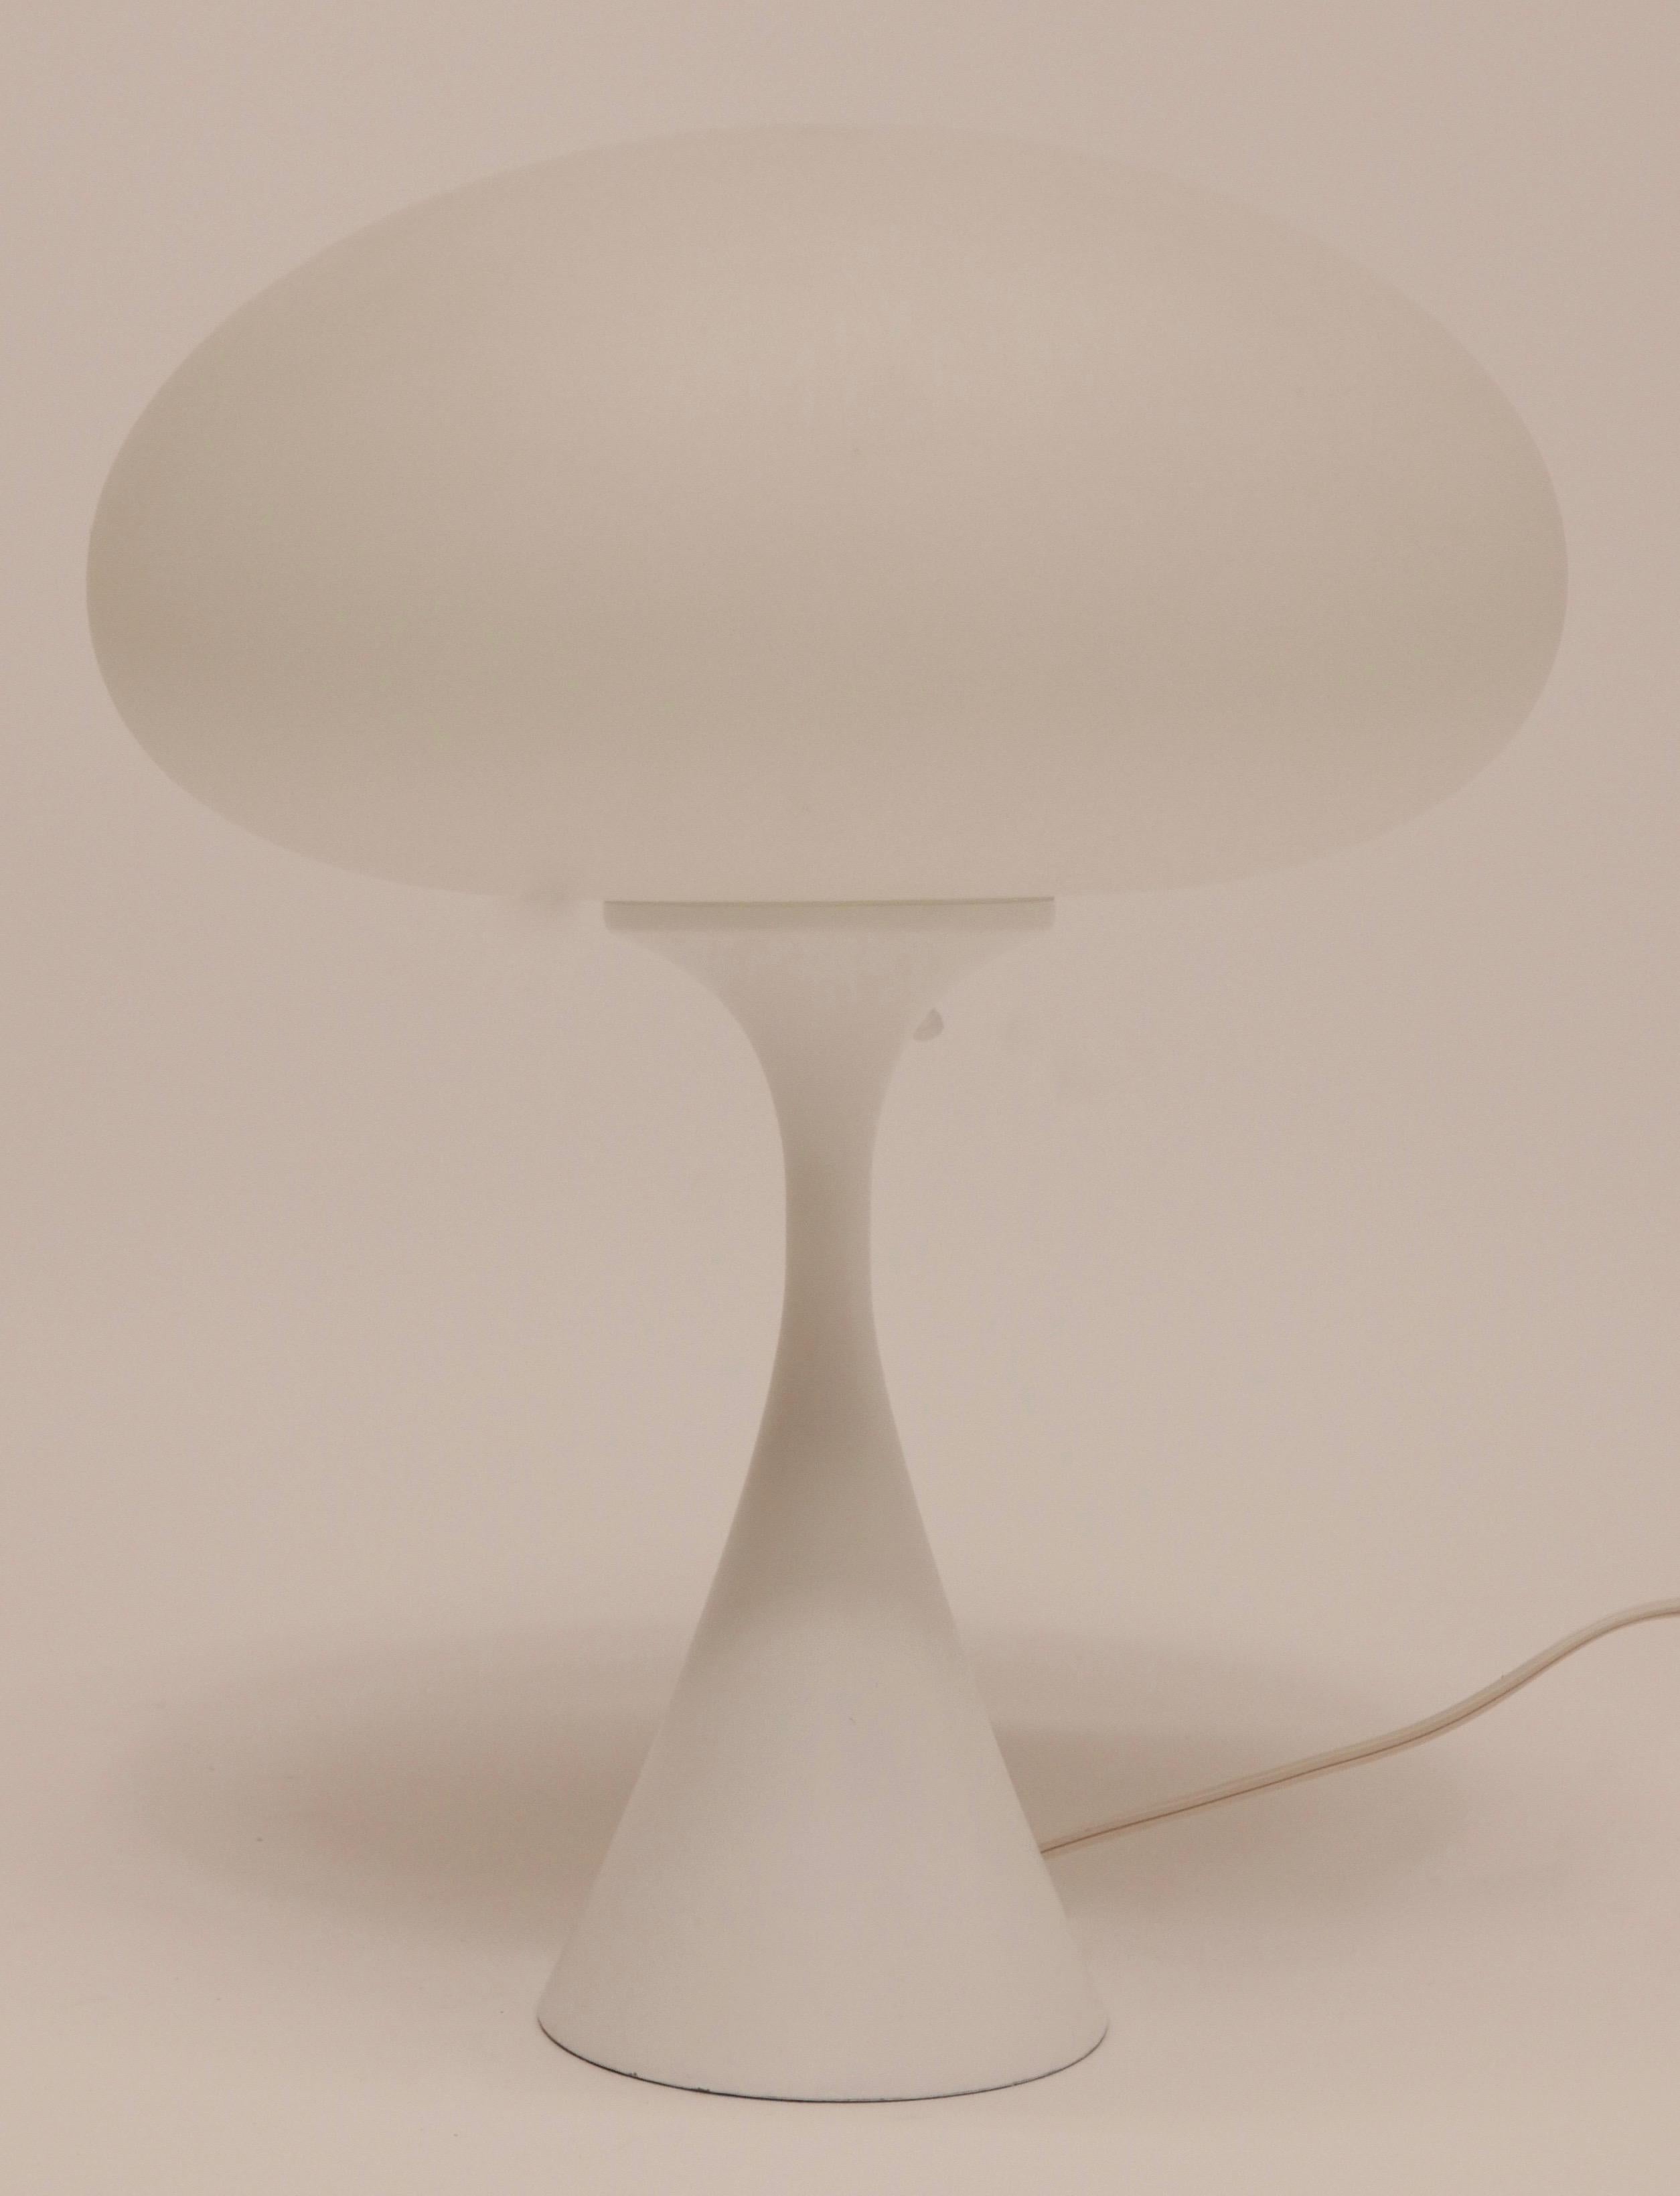 A Laurel Lamp Company white frosted mushroom globe on a white metal base table lamp.
The Laurel Lamp Company of Newark, NJ, was an active tastemaker in Mid-Century Modern lighting from the 1950s-1970s.
Professionally rewired and restored.